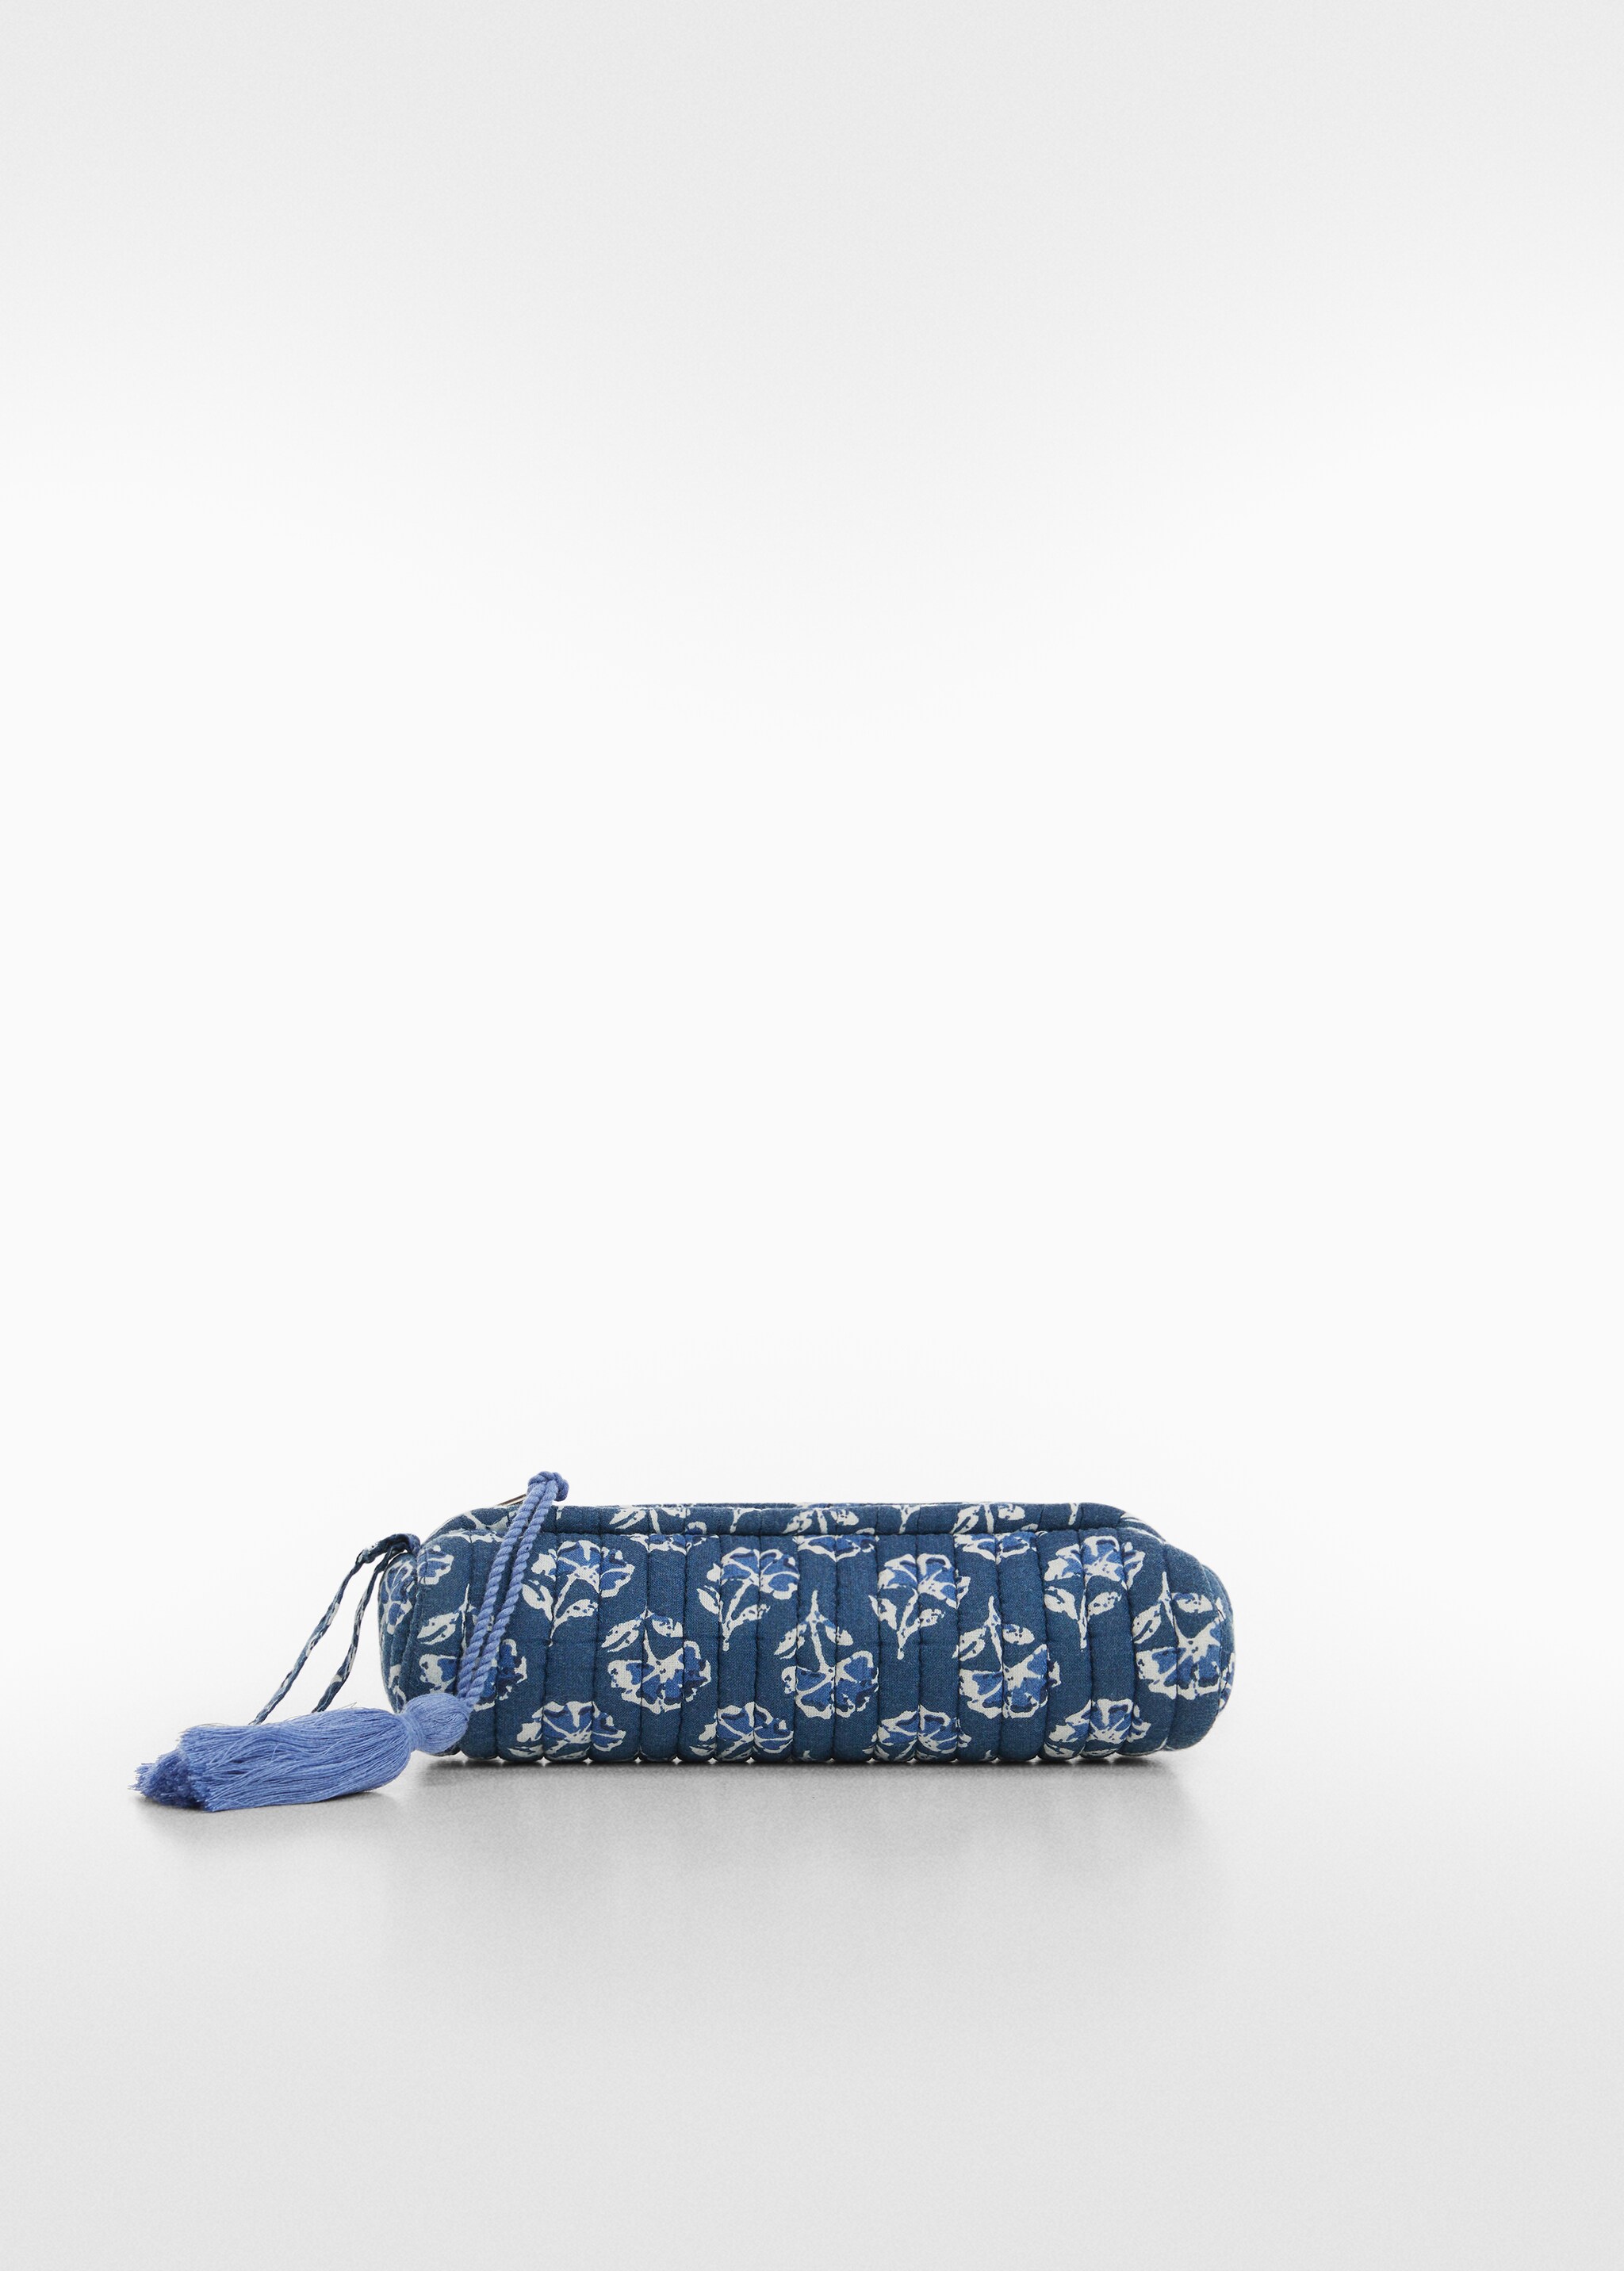 Printed pencil case - Article without model